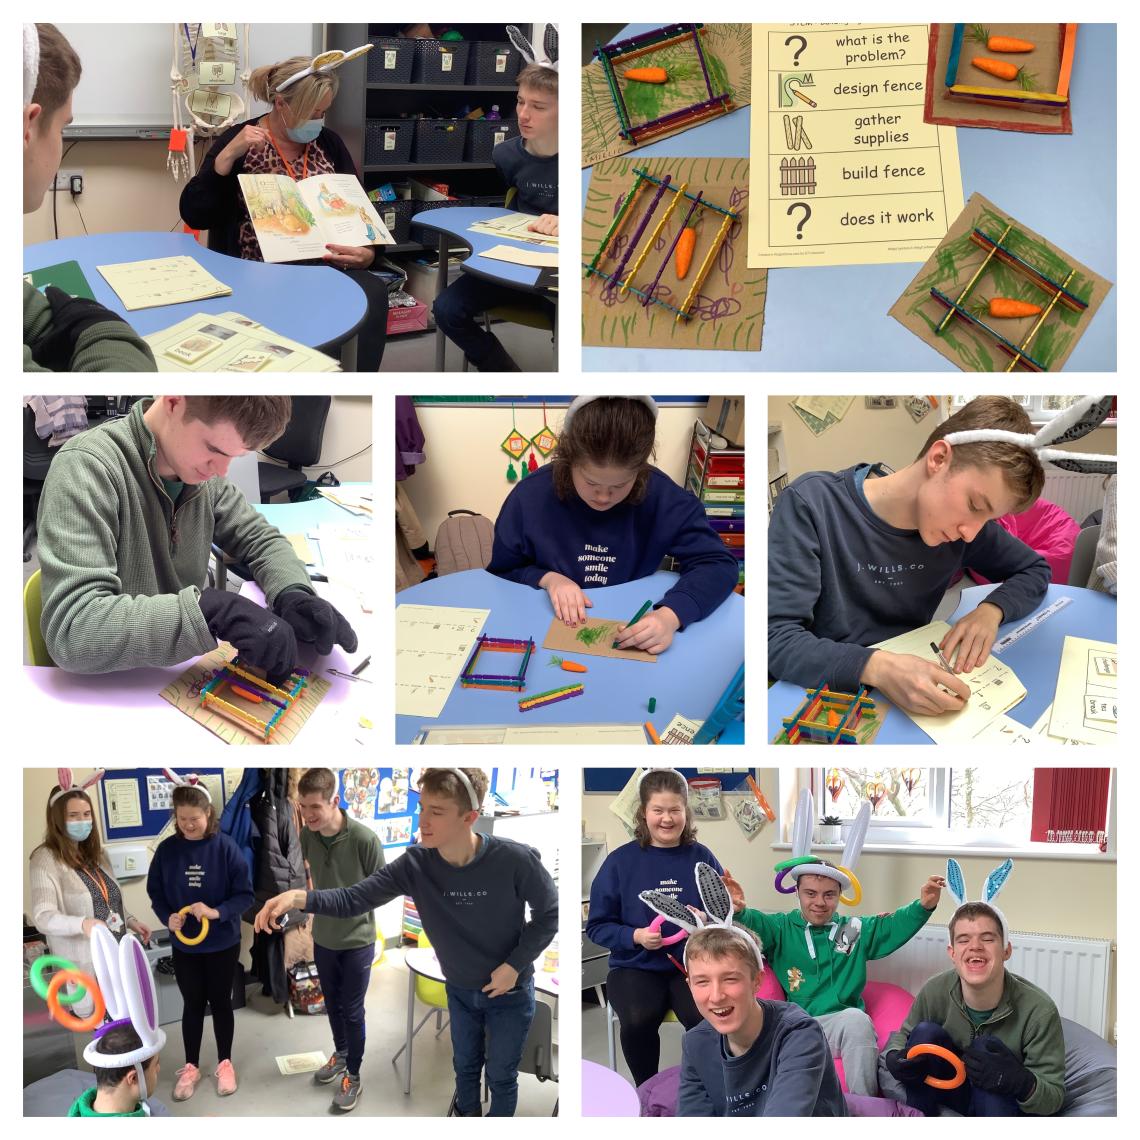 Collage of learners making fences with small sticks